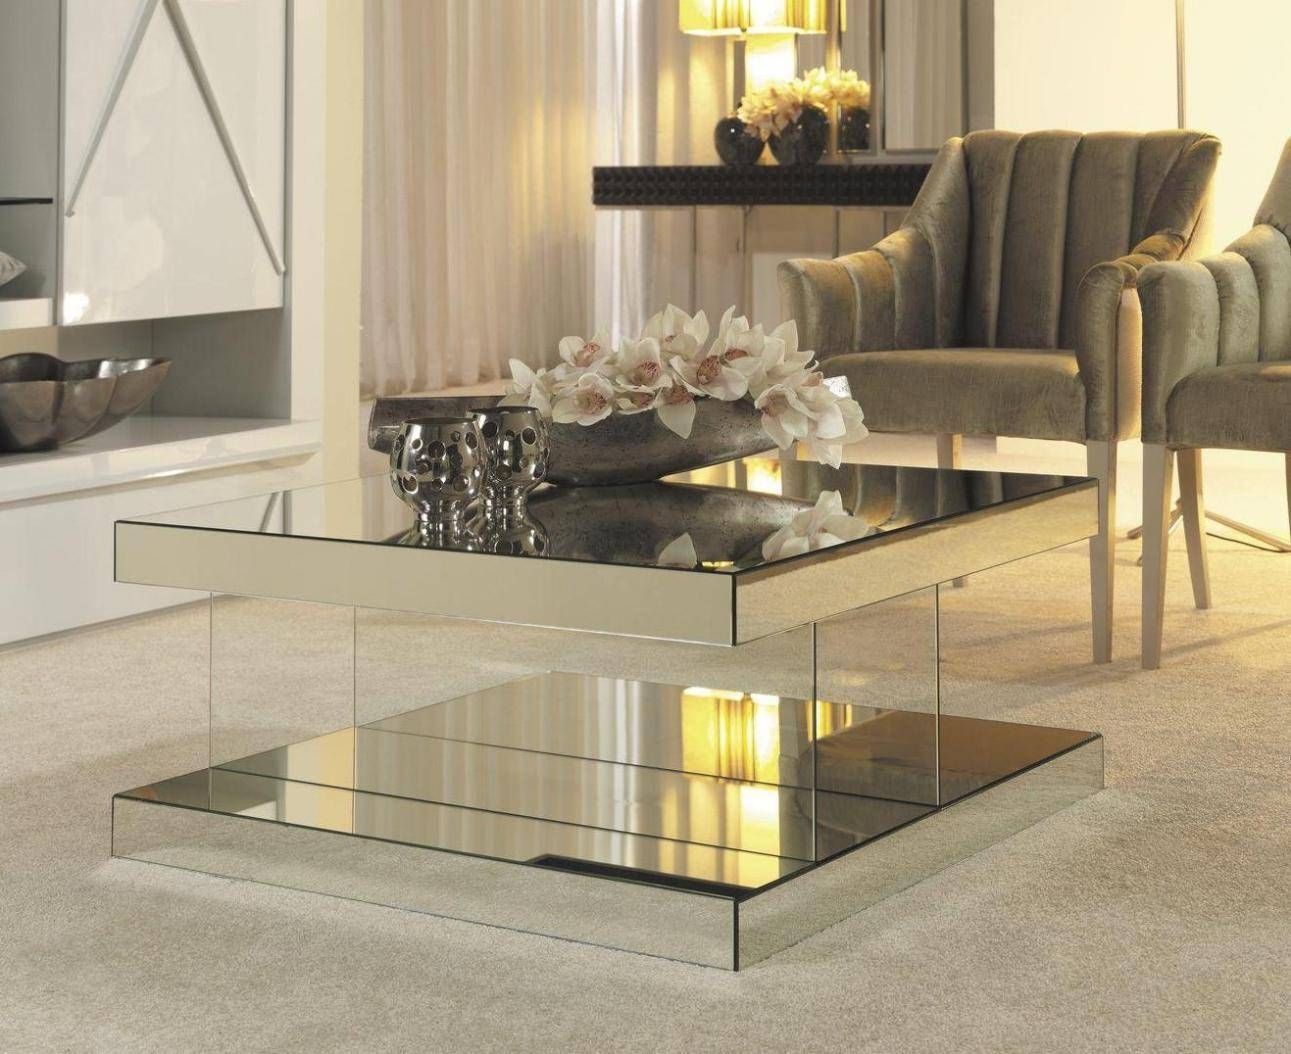 Square Mirrored Coffee Table Harpsoundsco – Jericho Mafjar Project Intended For Mirrored Coffee Tables (View 6 of 30)